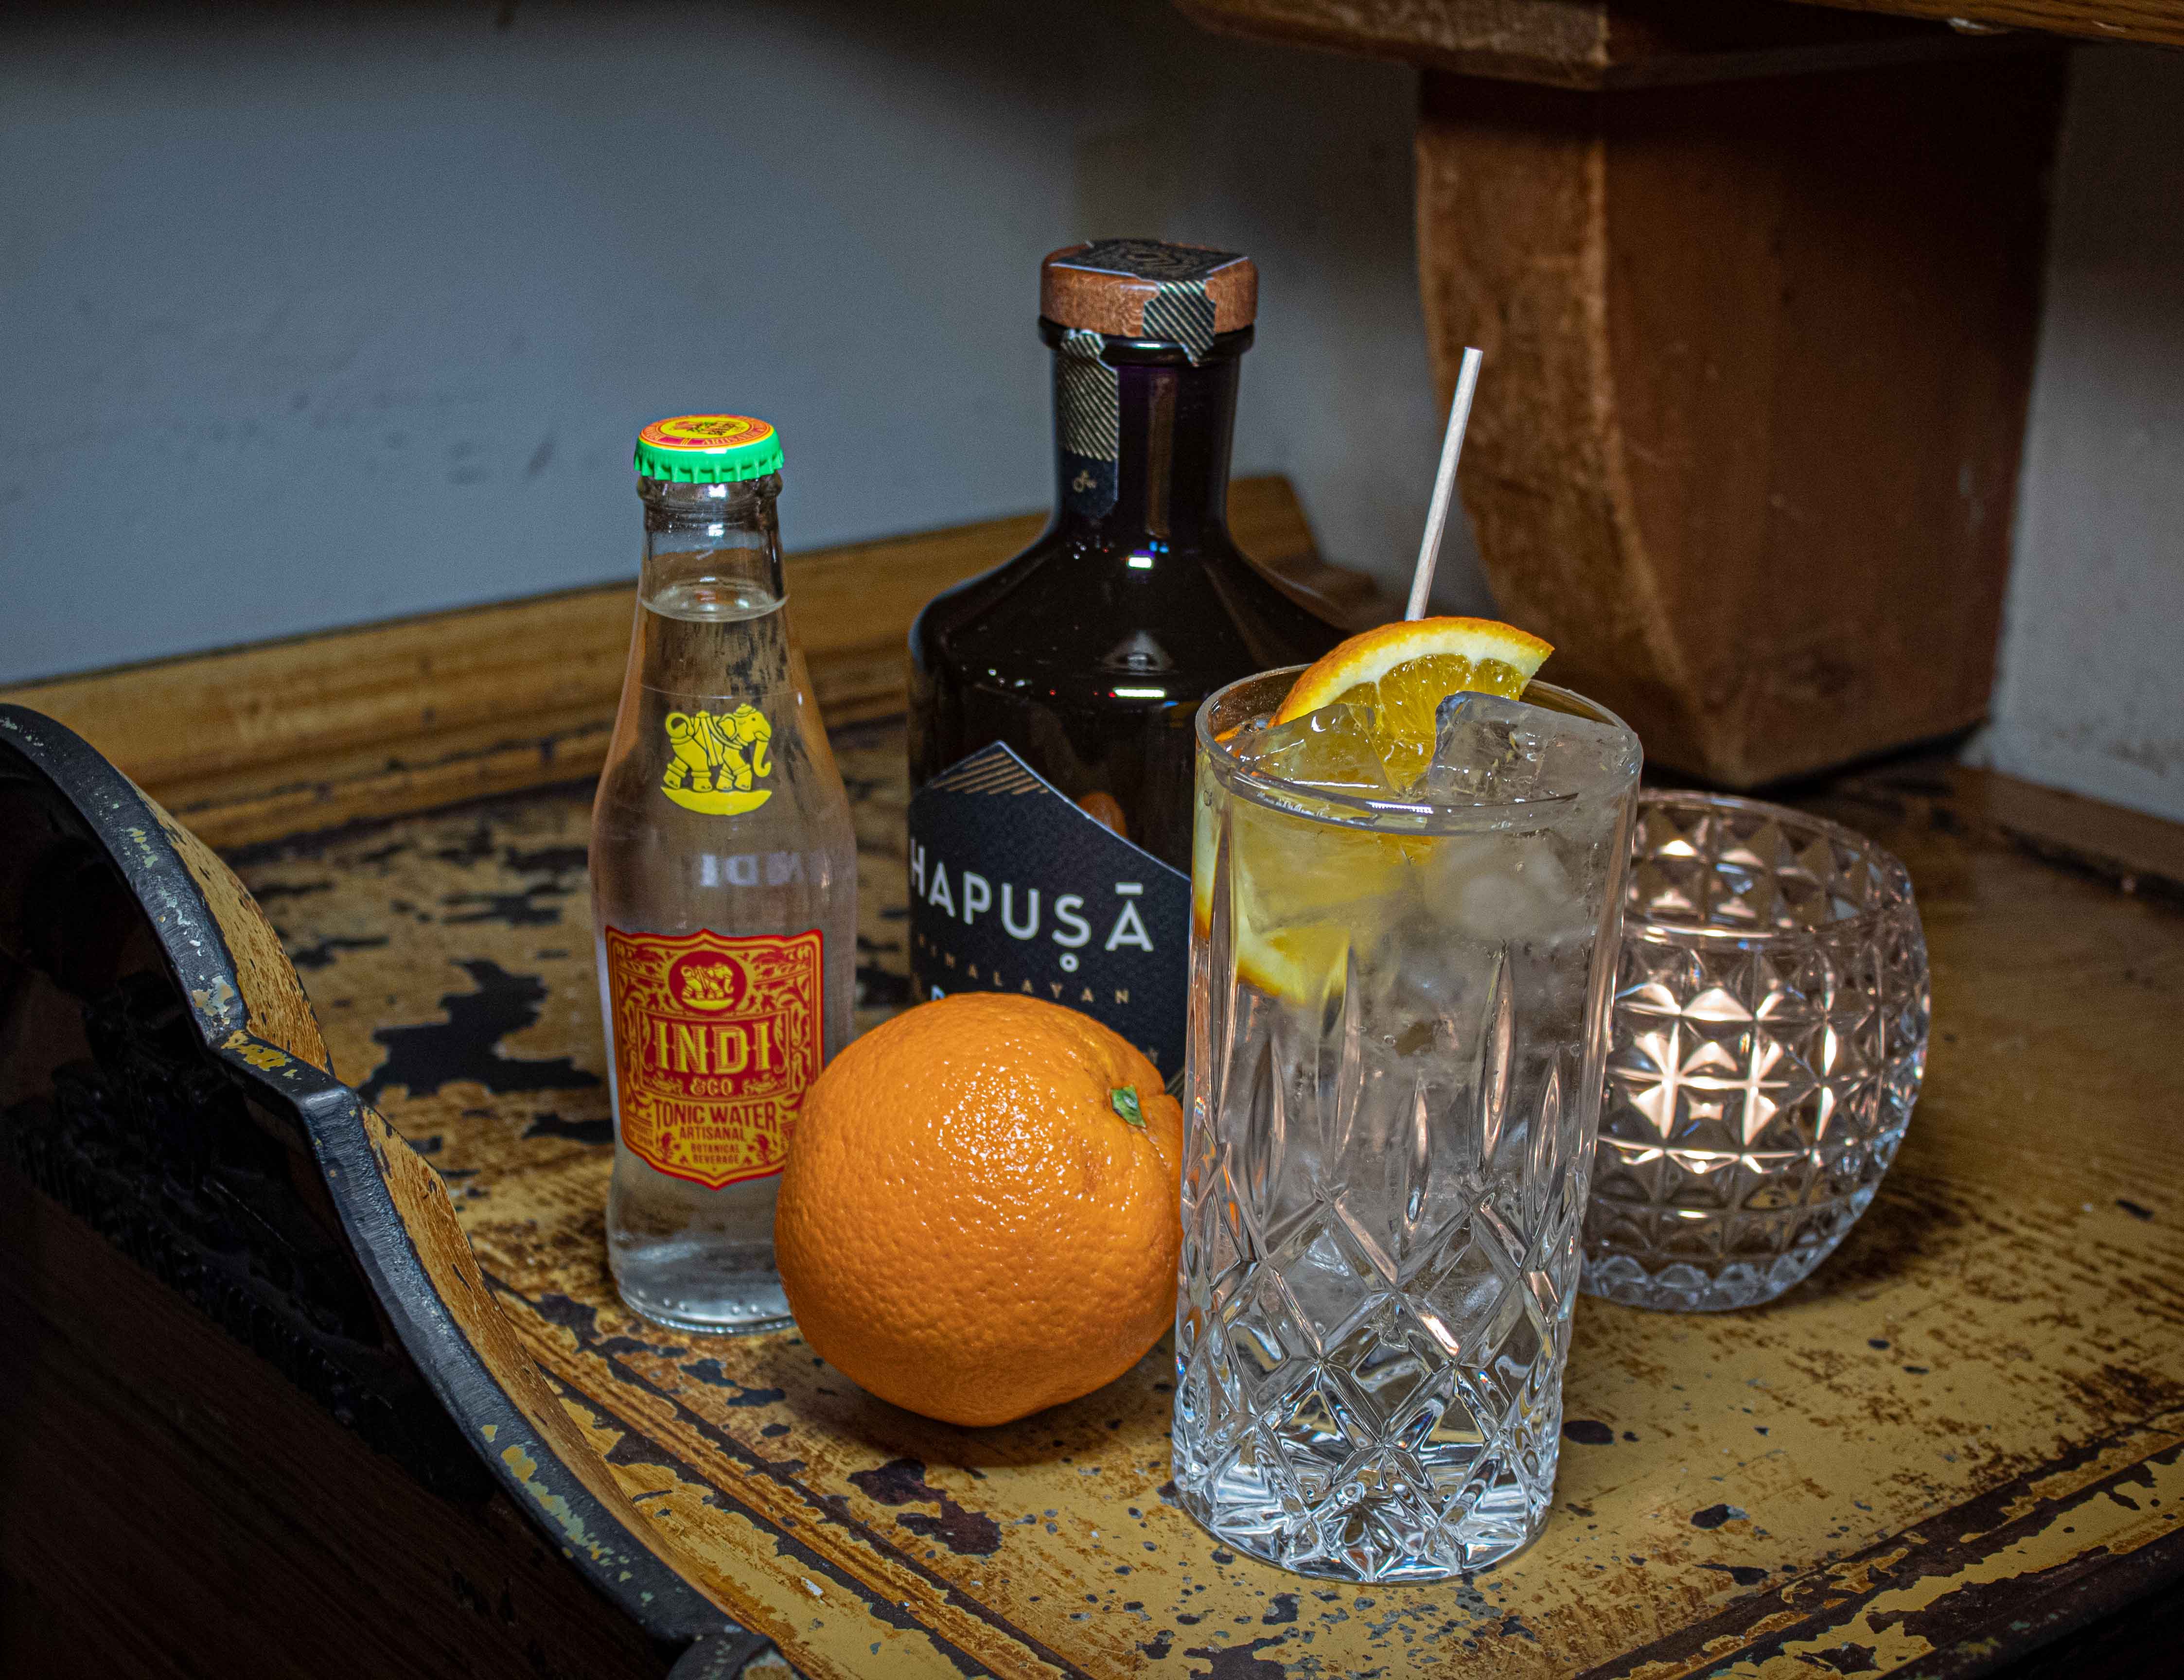 Hapusa Gin with Tonic Water